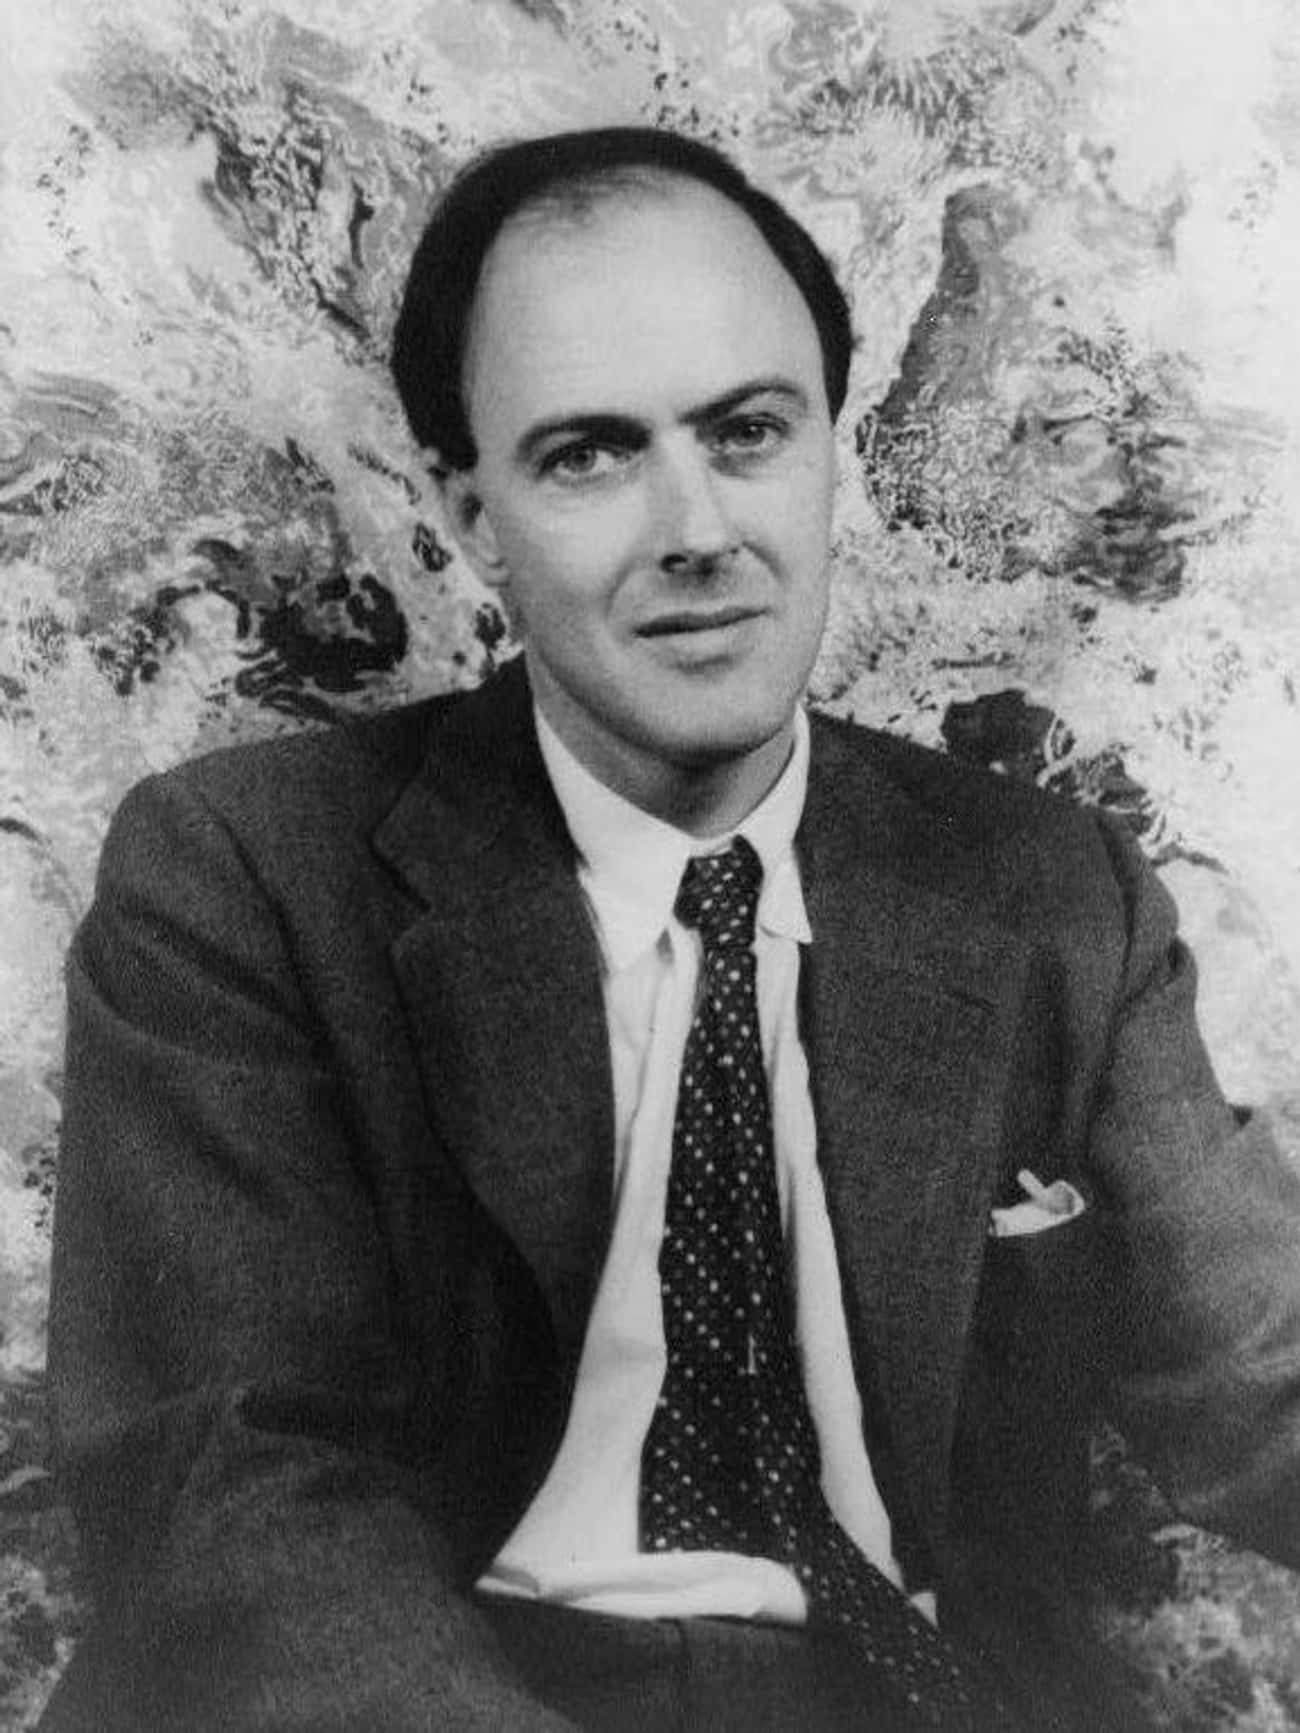 Roald Dahl Was A WWII Spy Before He Wrote Books For Kids